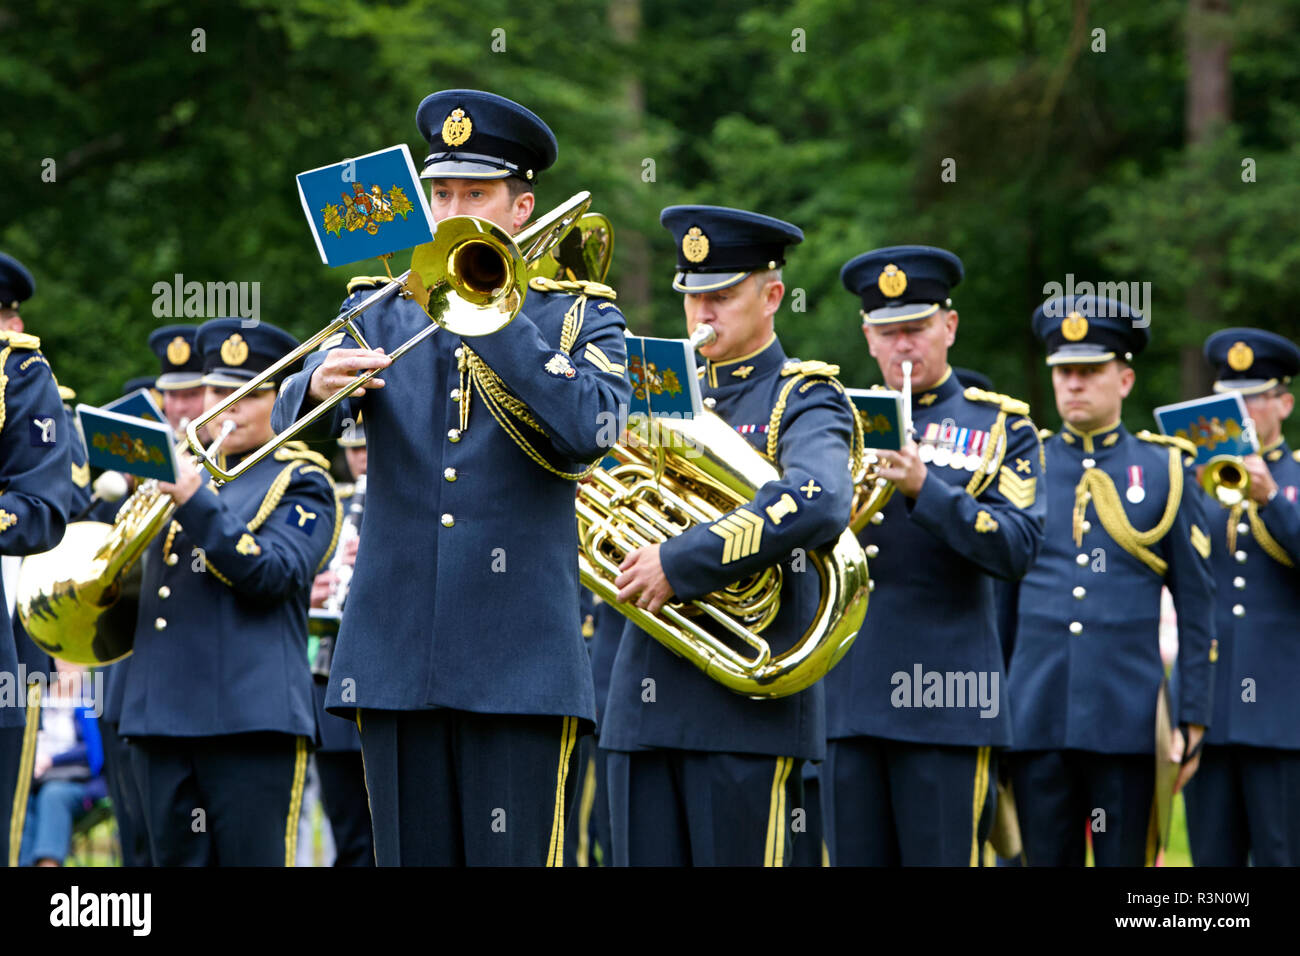 The Royal Air Force Central Band perform in the uk Stock Photo